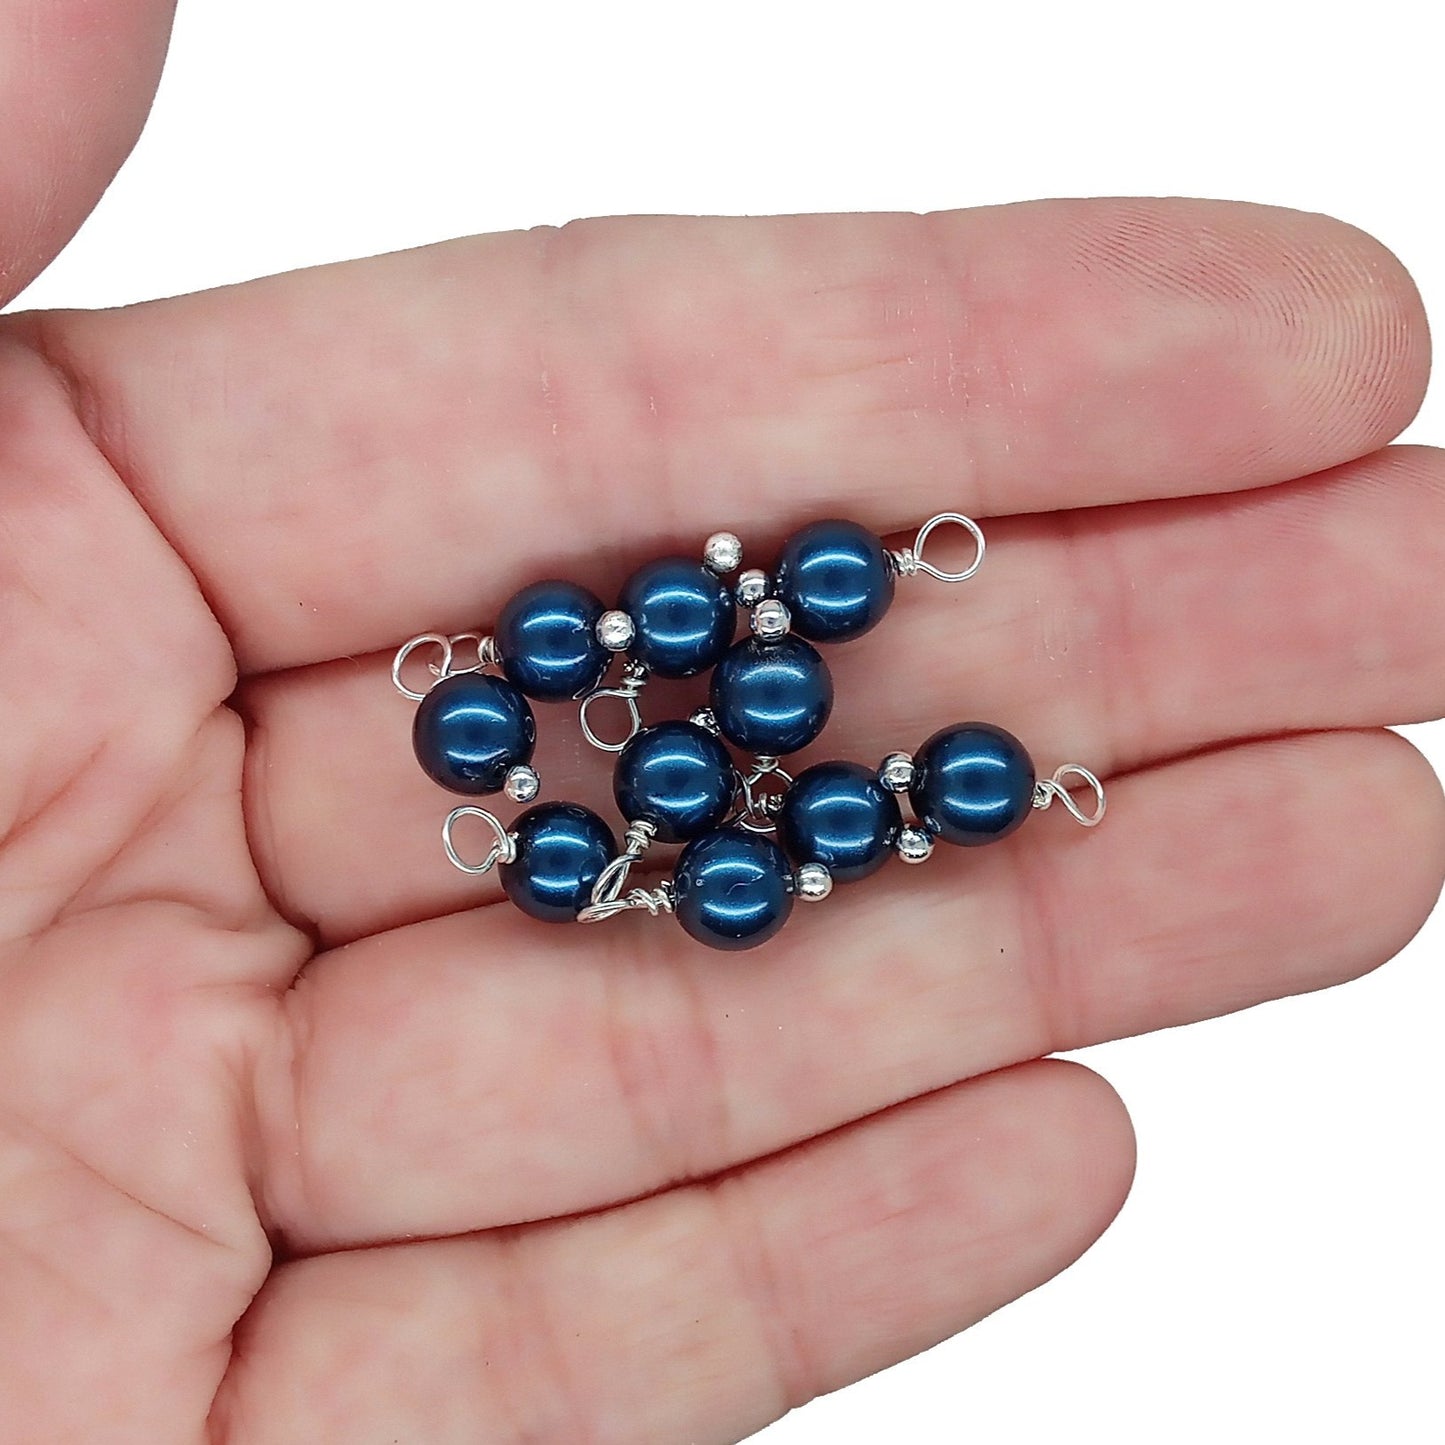 Crystal Pearl Bead Charms, Small Navy Blue 6mm Dangles - Adorabilities Charms & Trinkets